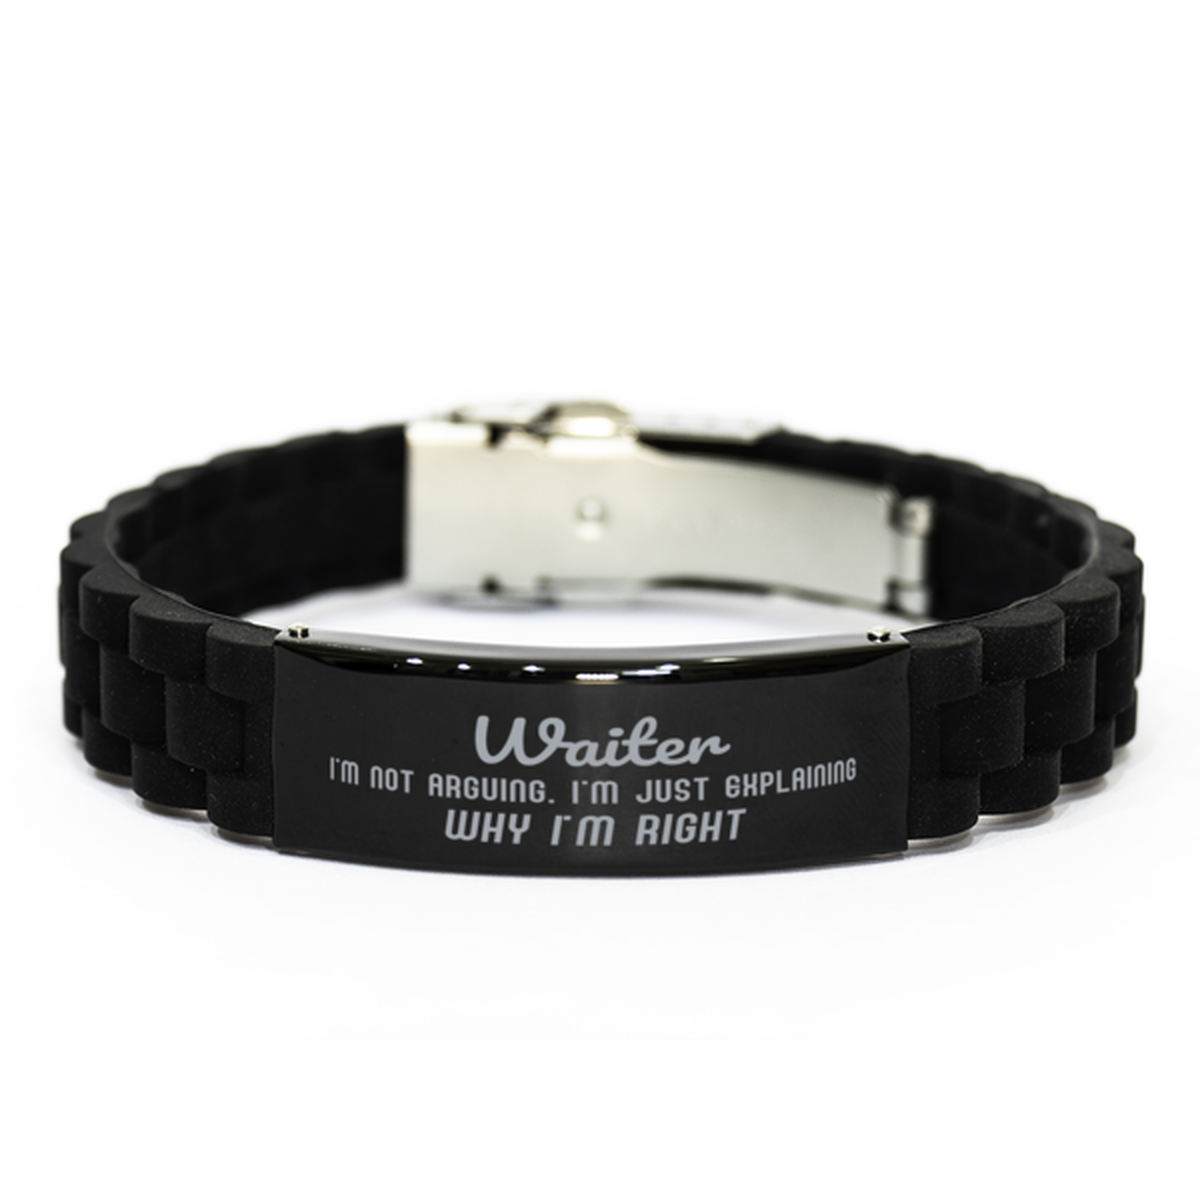 Waiter I'm not Arguing. I'm Just Explaining Why I'm RIGHT Black Glidelock Clasp Bracelet, Funny Saying Quote Waiter Gifts For Waiter Graduation Birthday Christmas Gifts for Men Women Coworker